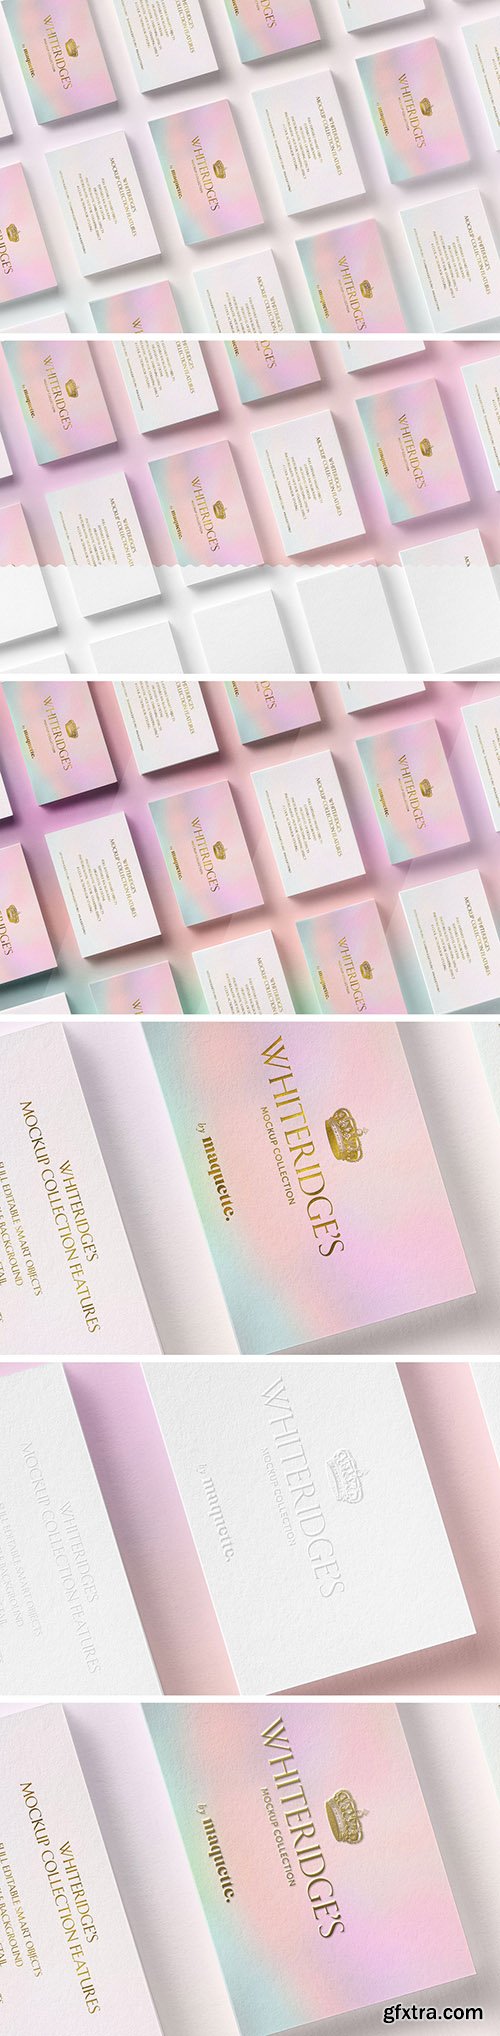 Array of Luxury Gold-Embossed Business Cards Mockup 2 130437028